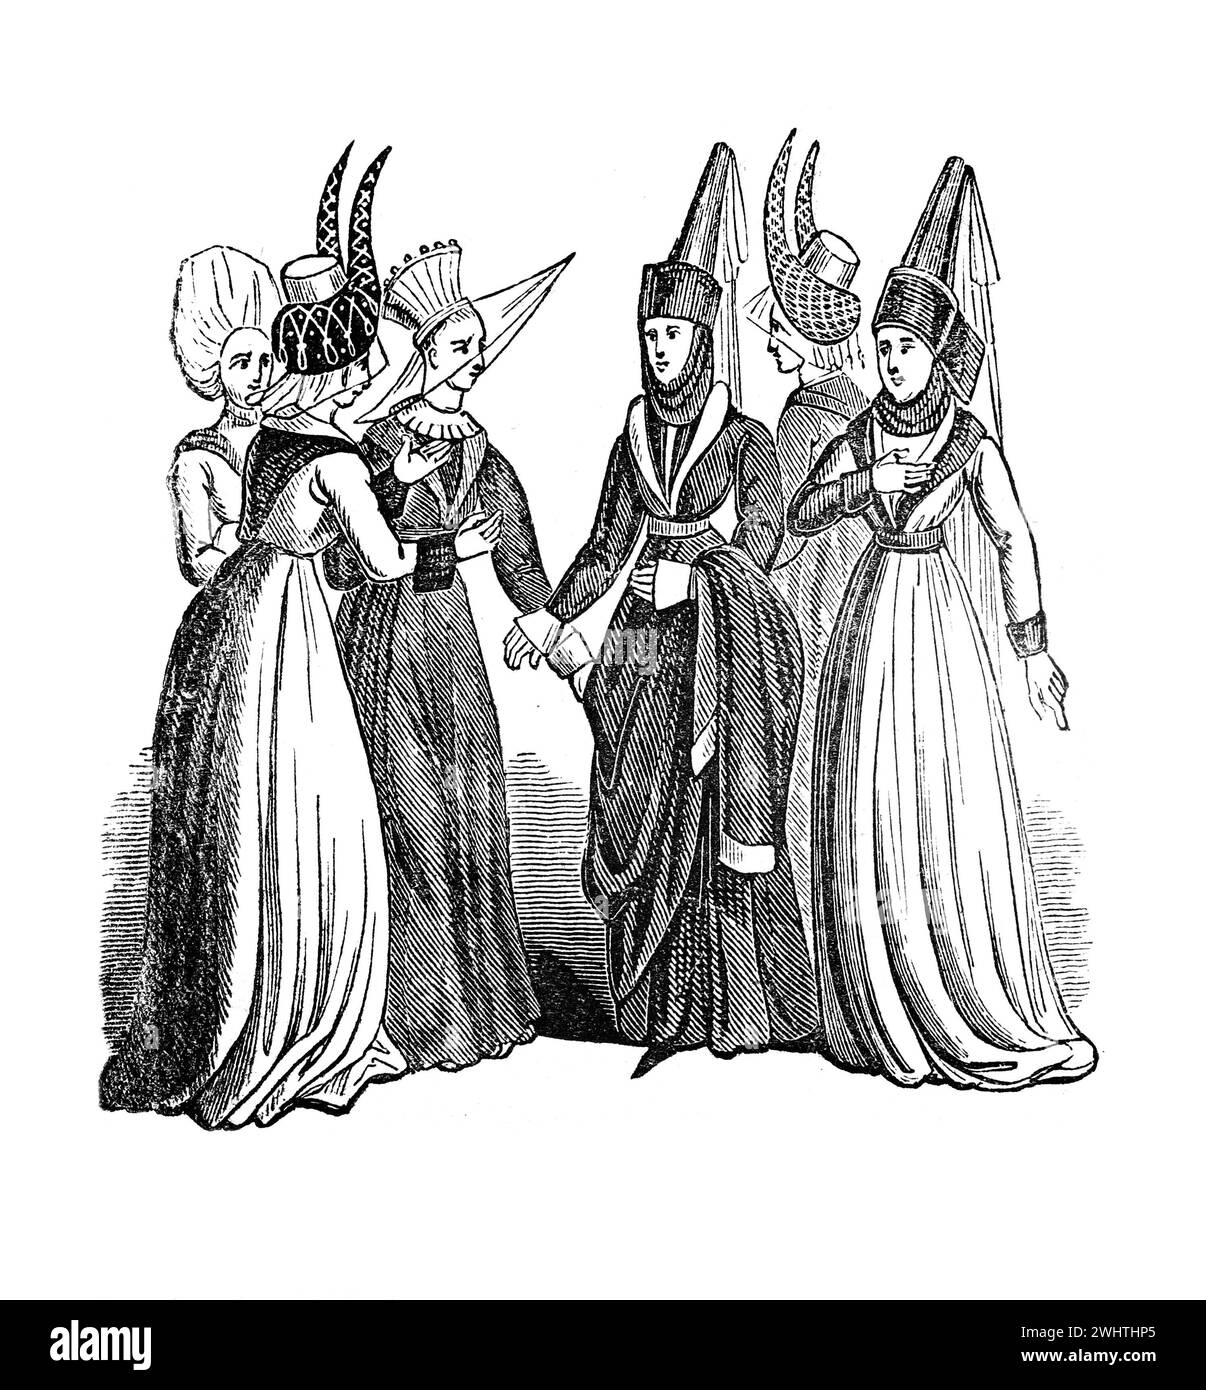 Female costume in the time of Edward IV. 15th Century England. Black and White Illustration from the 'Old England' published by James Sangster in 1860. Stock Photo